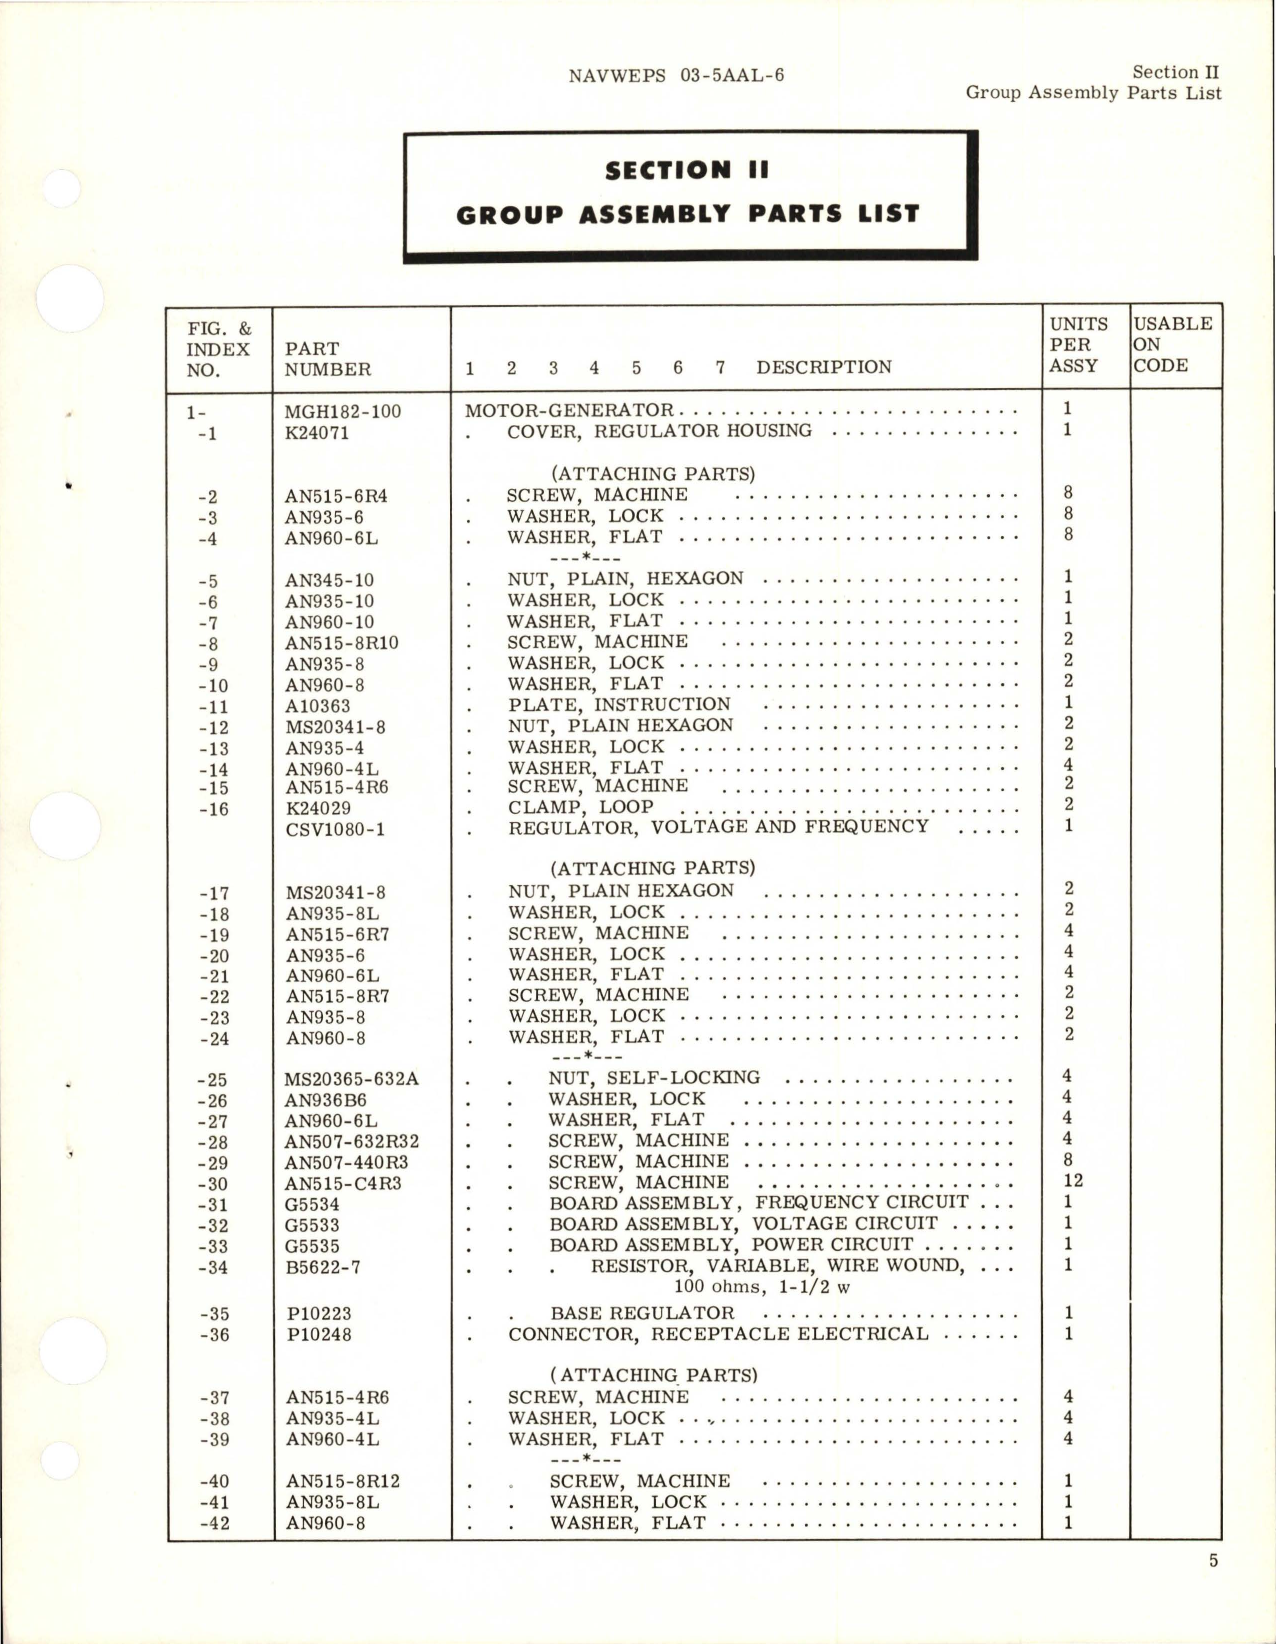 Sample page 7 from AirCorps Library document: Illustrated Parts Breakdown for Motor Generator - Part MGH182-100